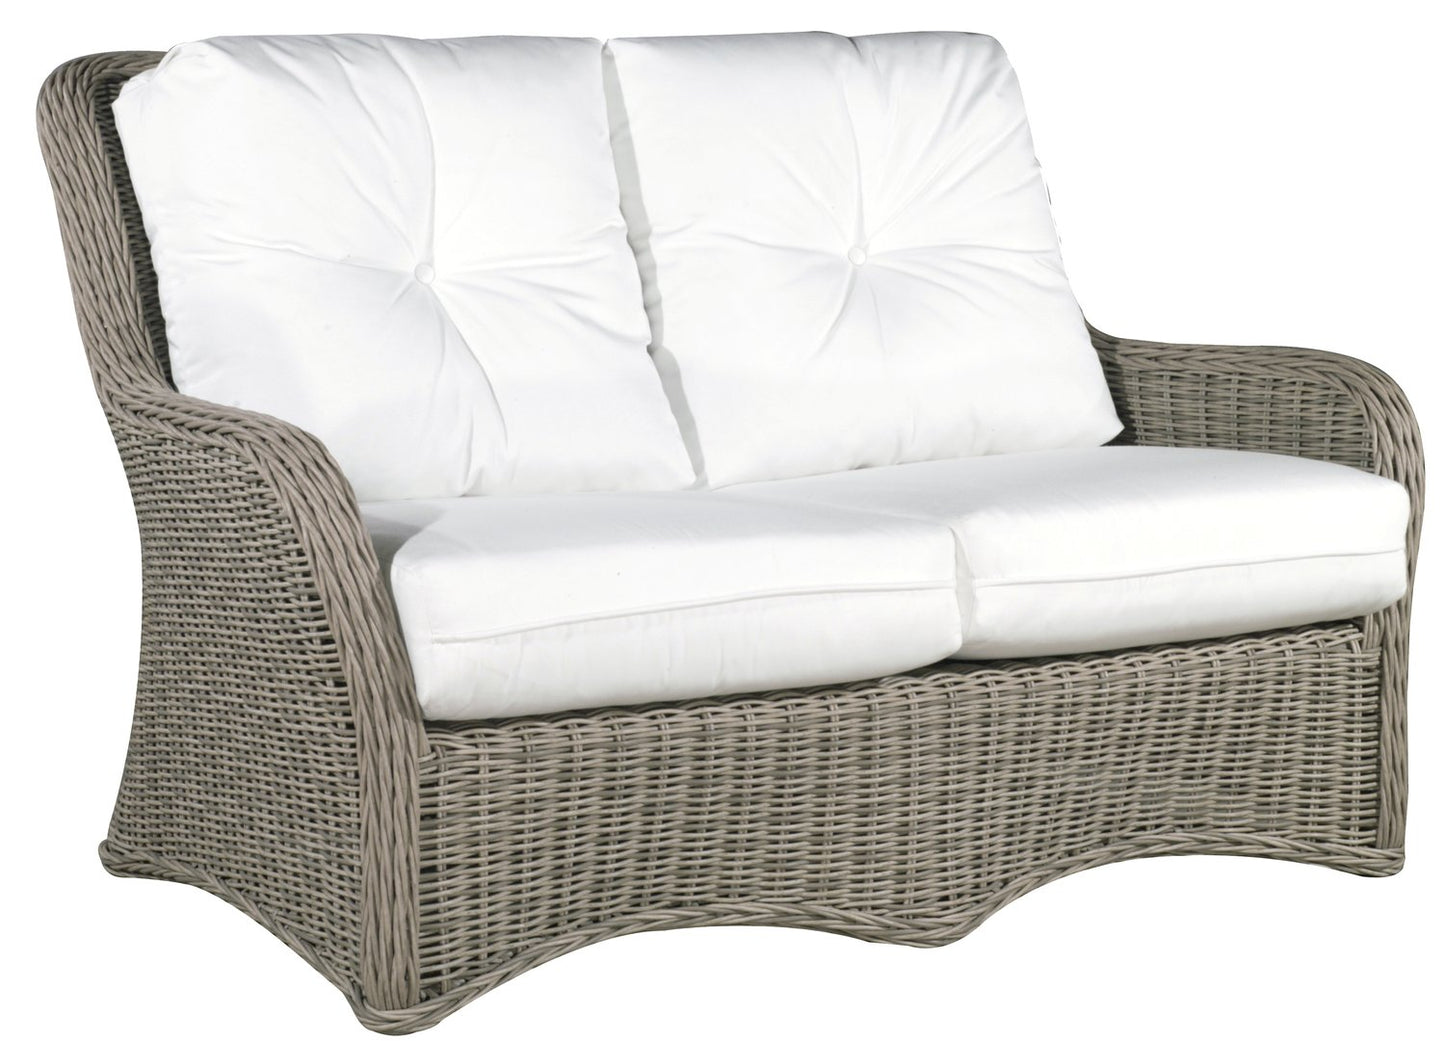 Shop Local Spokane Valley, WA for the best outdoor patio loveseats from Patio Renaissance available at Jacobs Custom Living in Spokane Valley, WA